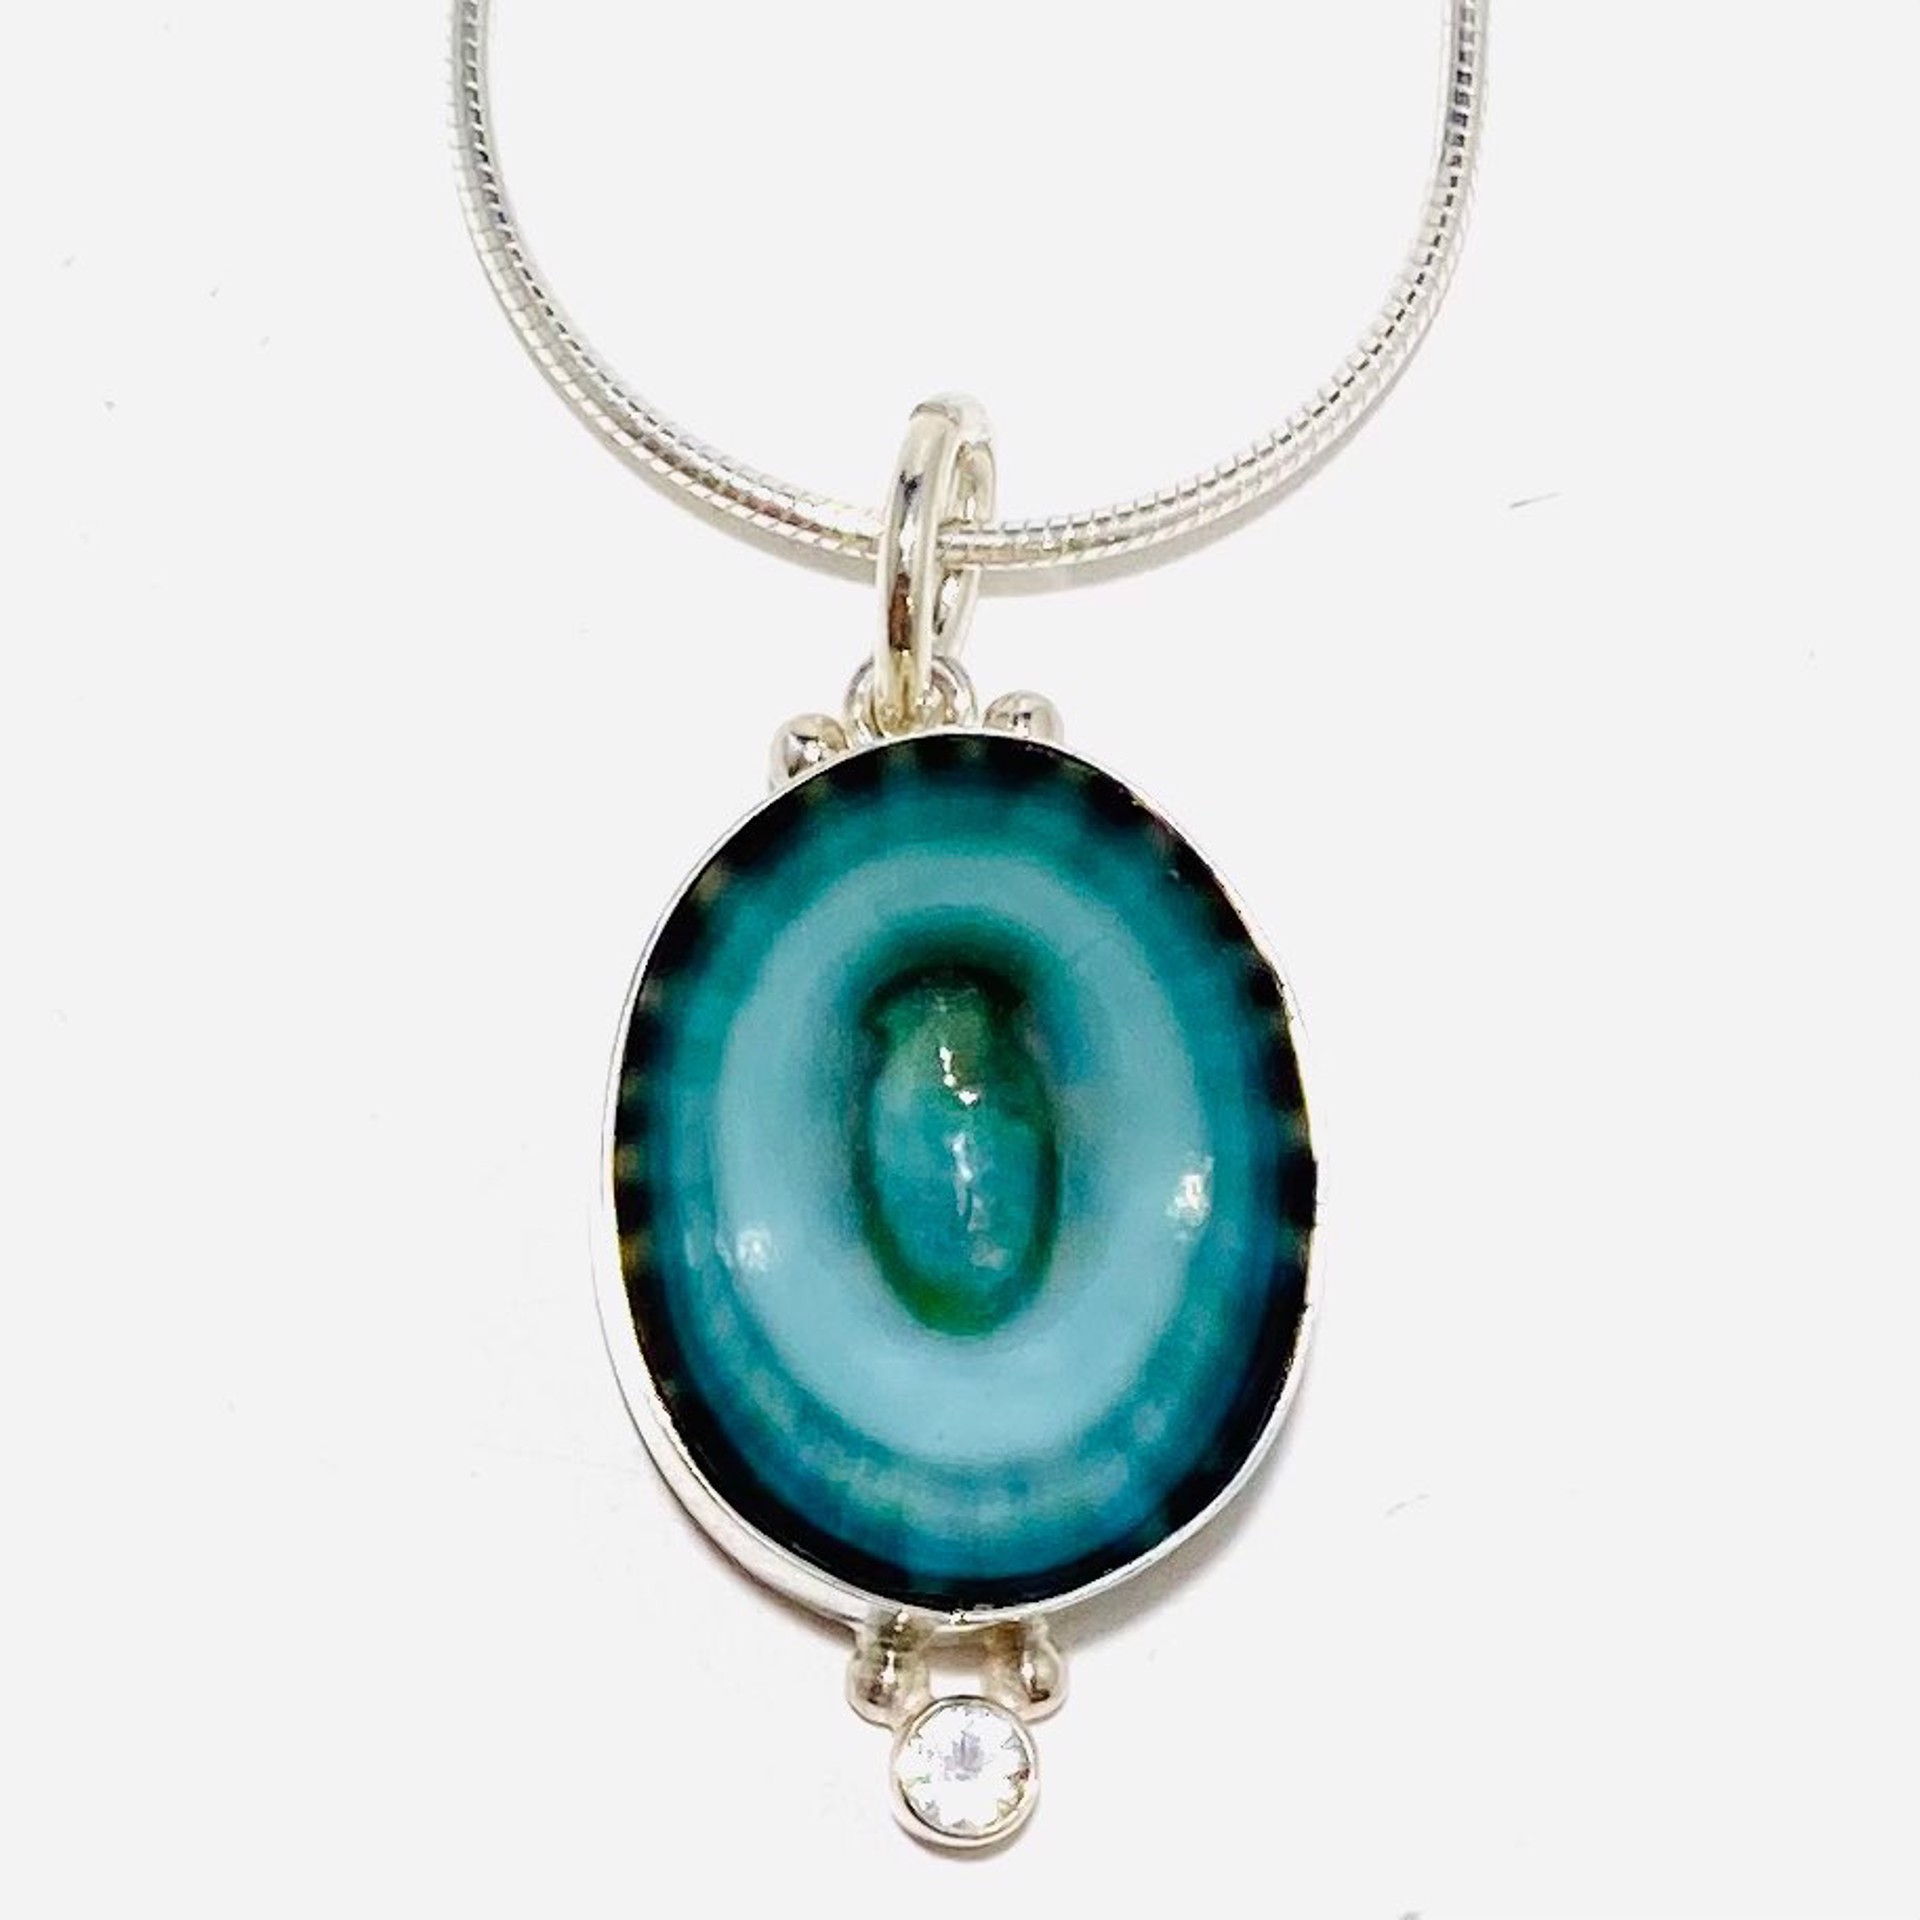 BU22-32 Aqua Limpet  (Pacific Meixco) White Topaz Pendant on 18"Italian Omega Chain Necklace by Barbara Umbel